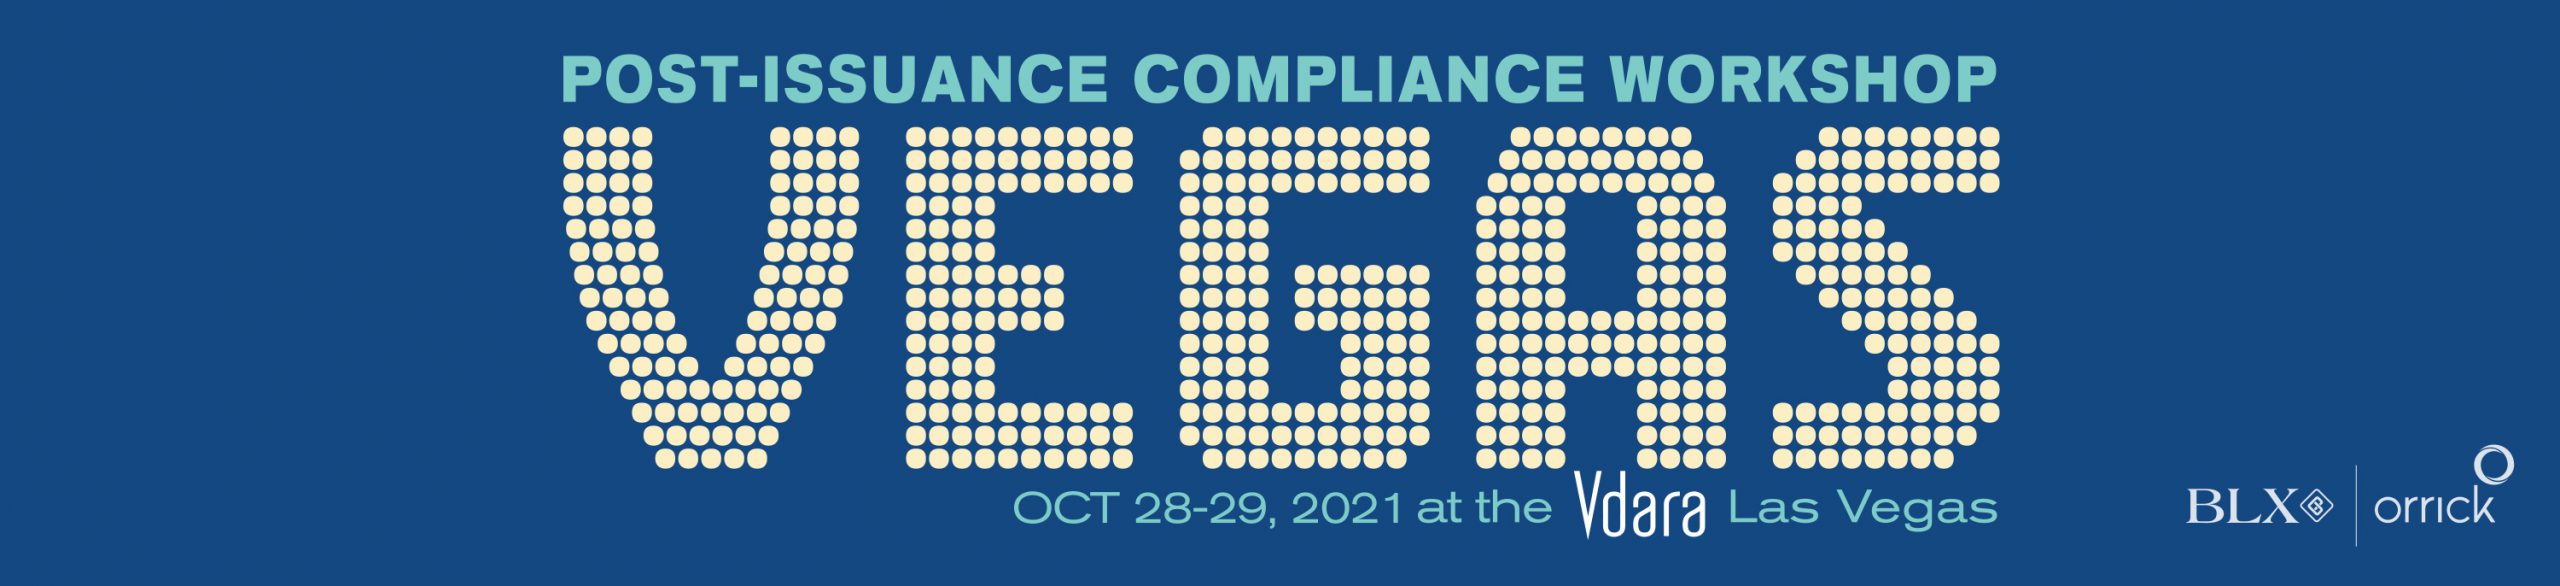 Post-Issuance Compliance Workshop Oct 28-29, 2021 at the Vdara Las Vegas